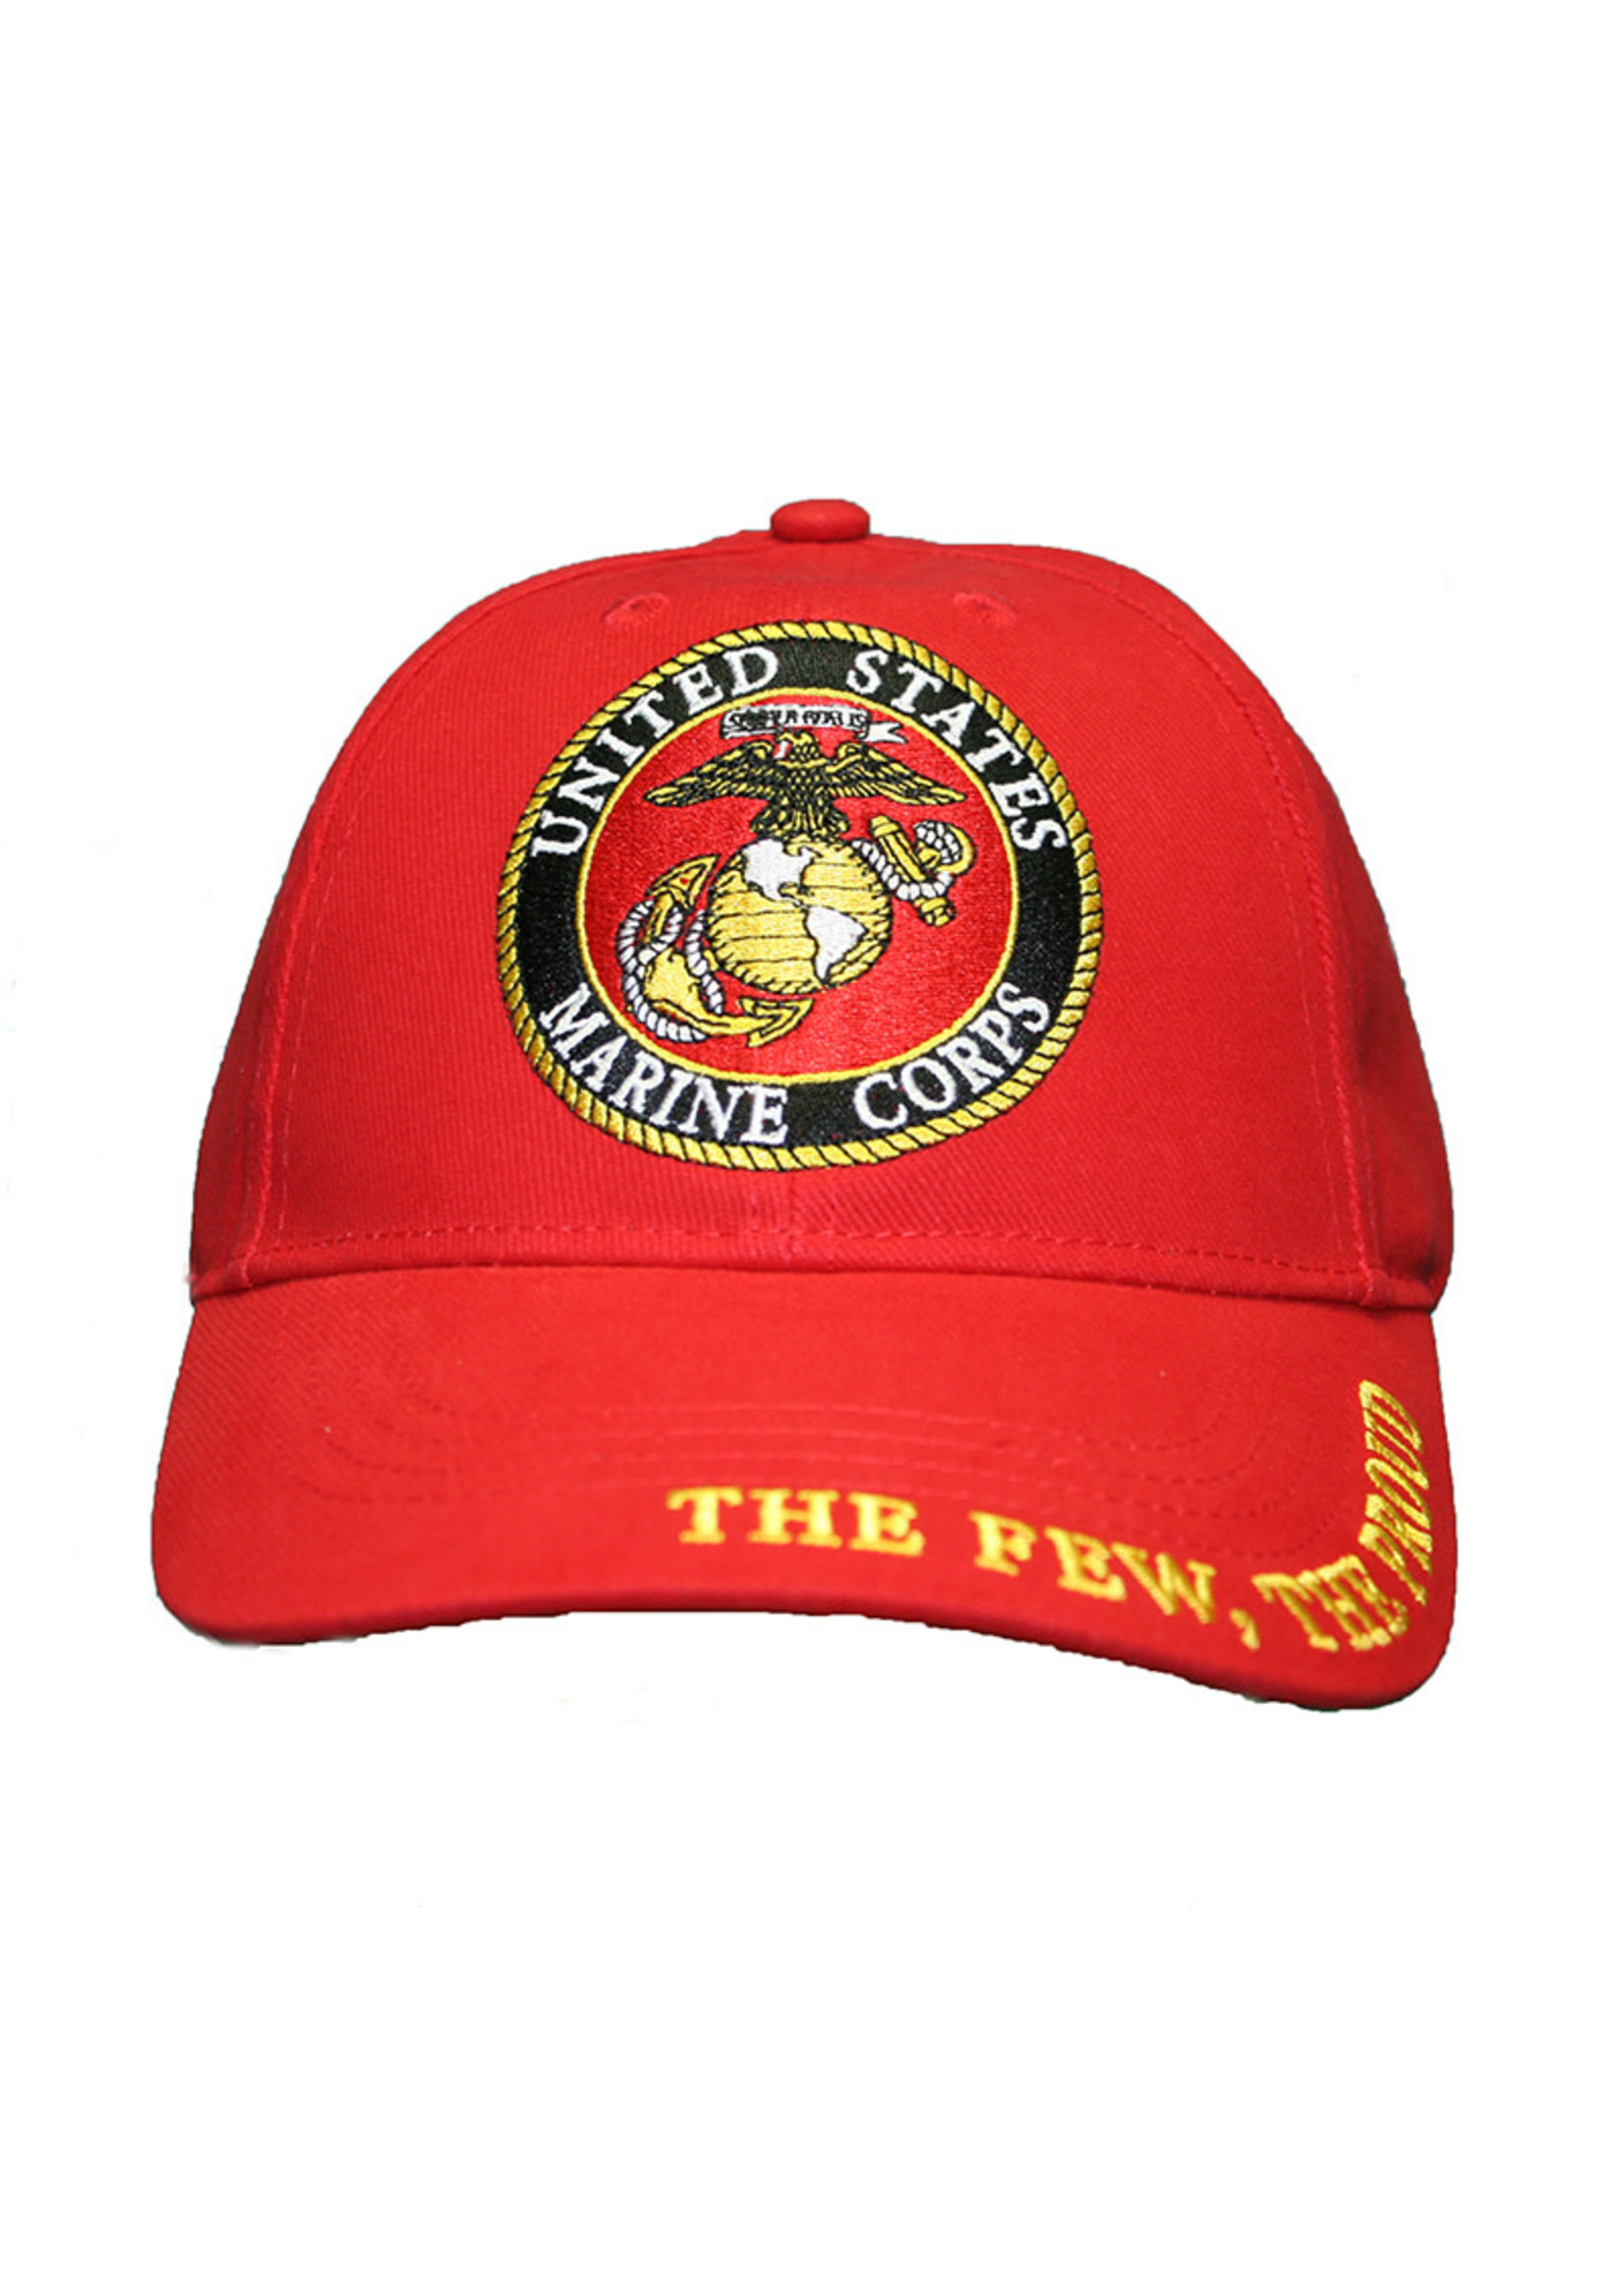 Eagle Emblems Cap Marine Corps - The Few, The Proud Red